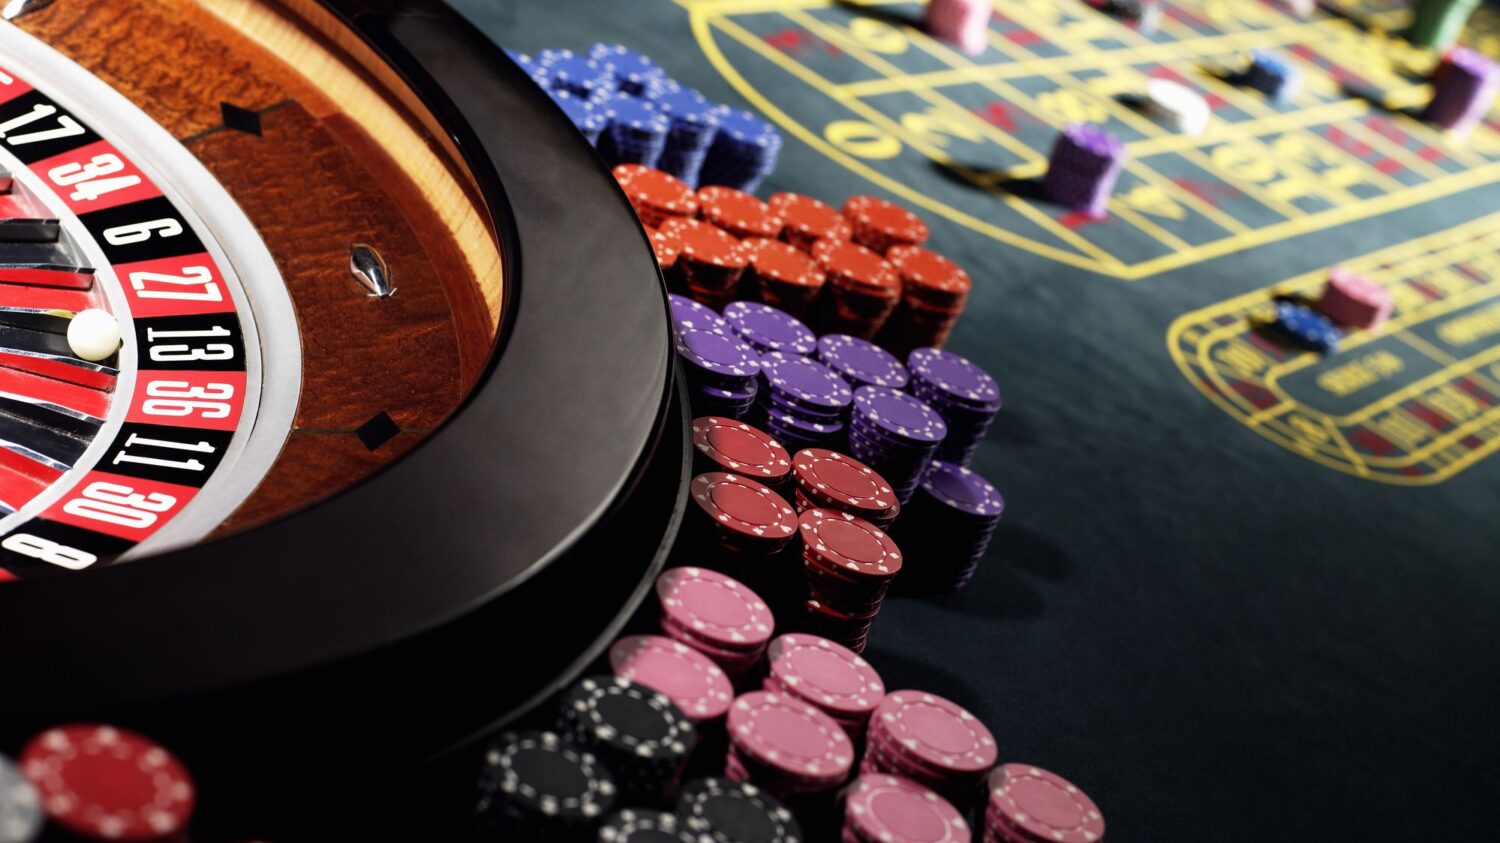 Why Is There a Fear in The Casinos for Baccarat?